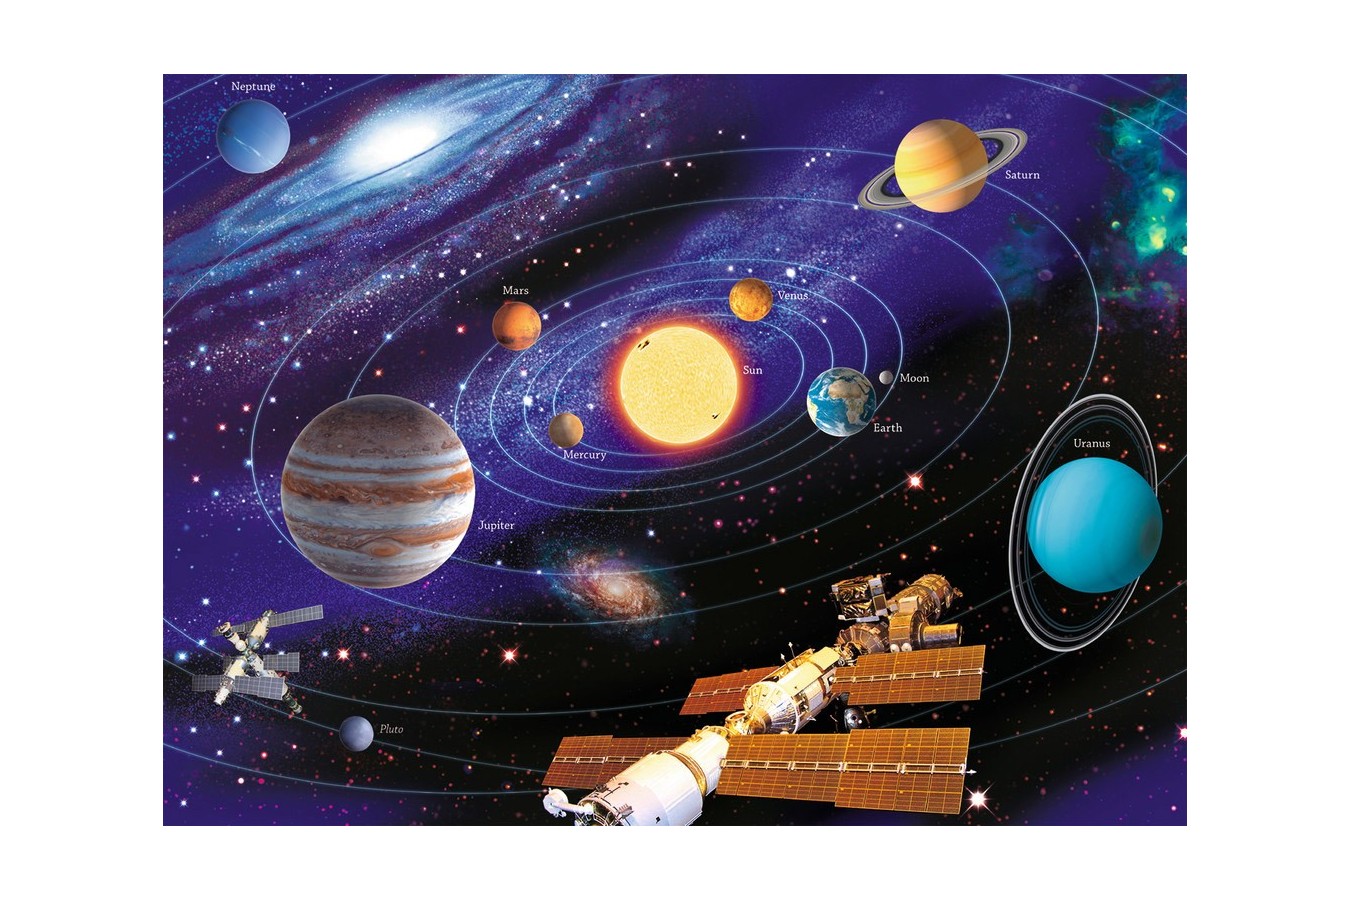 Puzzle Ravensburger - The Solar System, 200 piese XXL (12796)